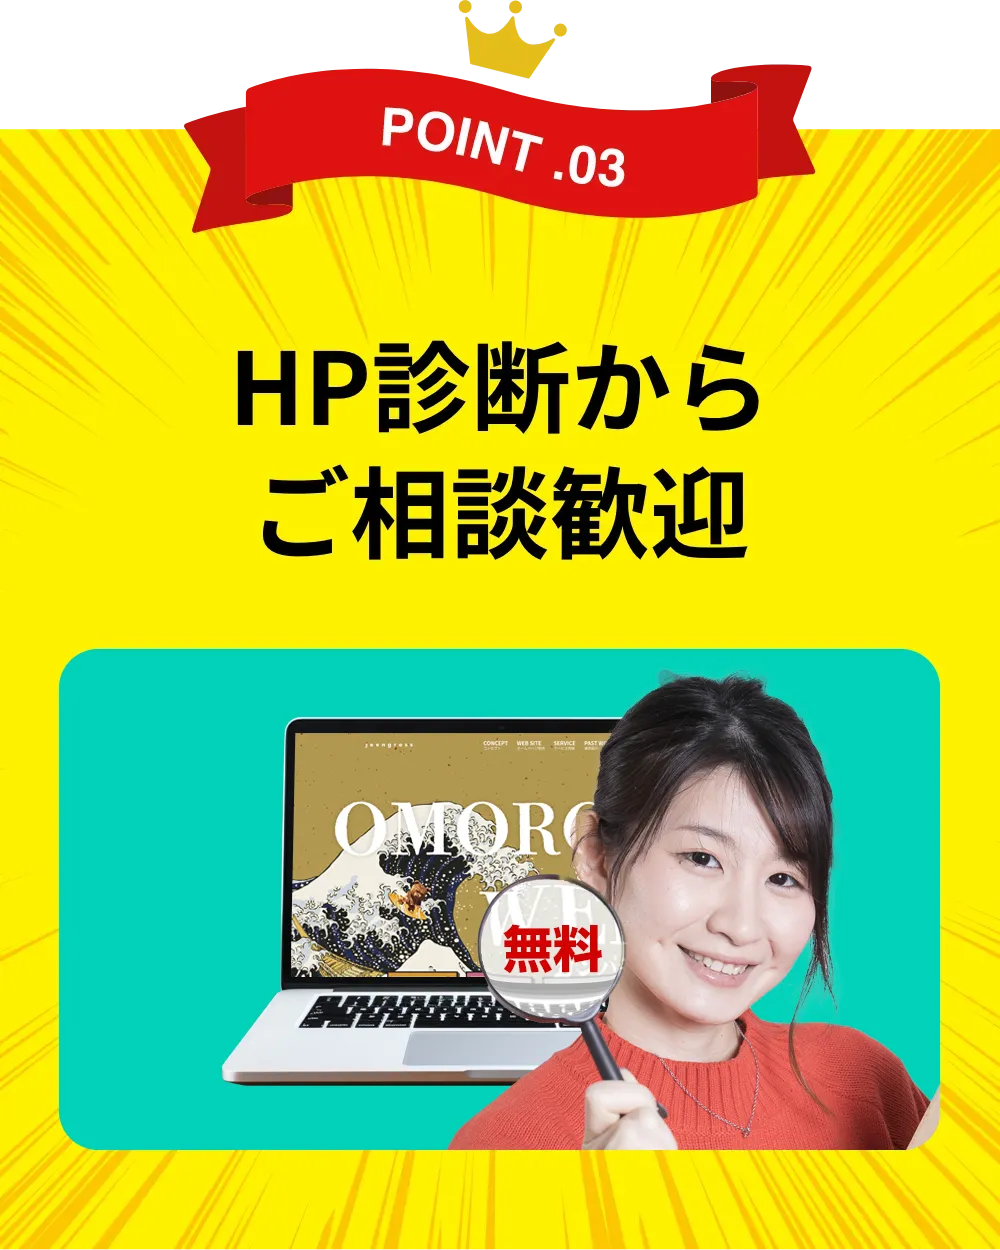 POINT.03 HP診断からご相談歓迎